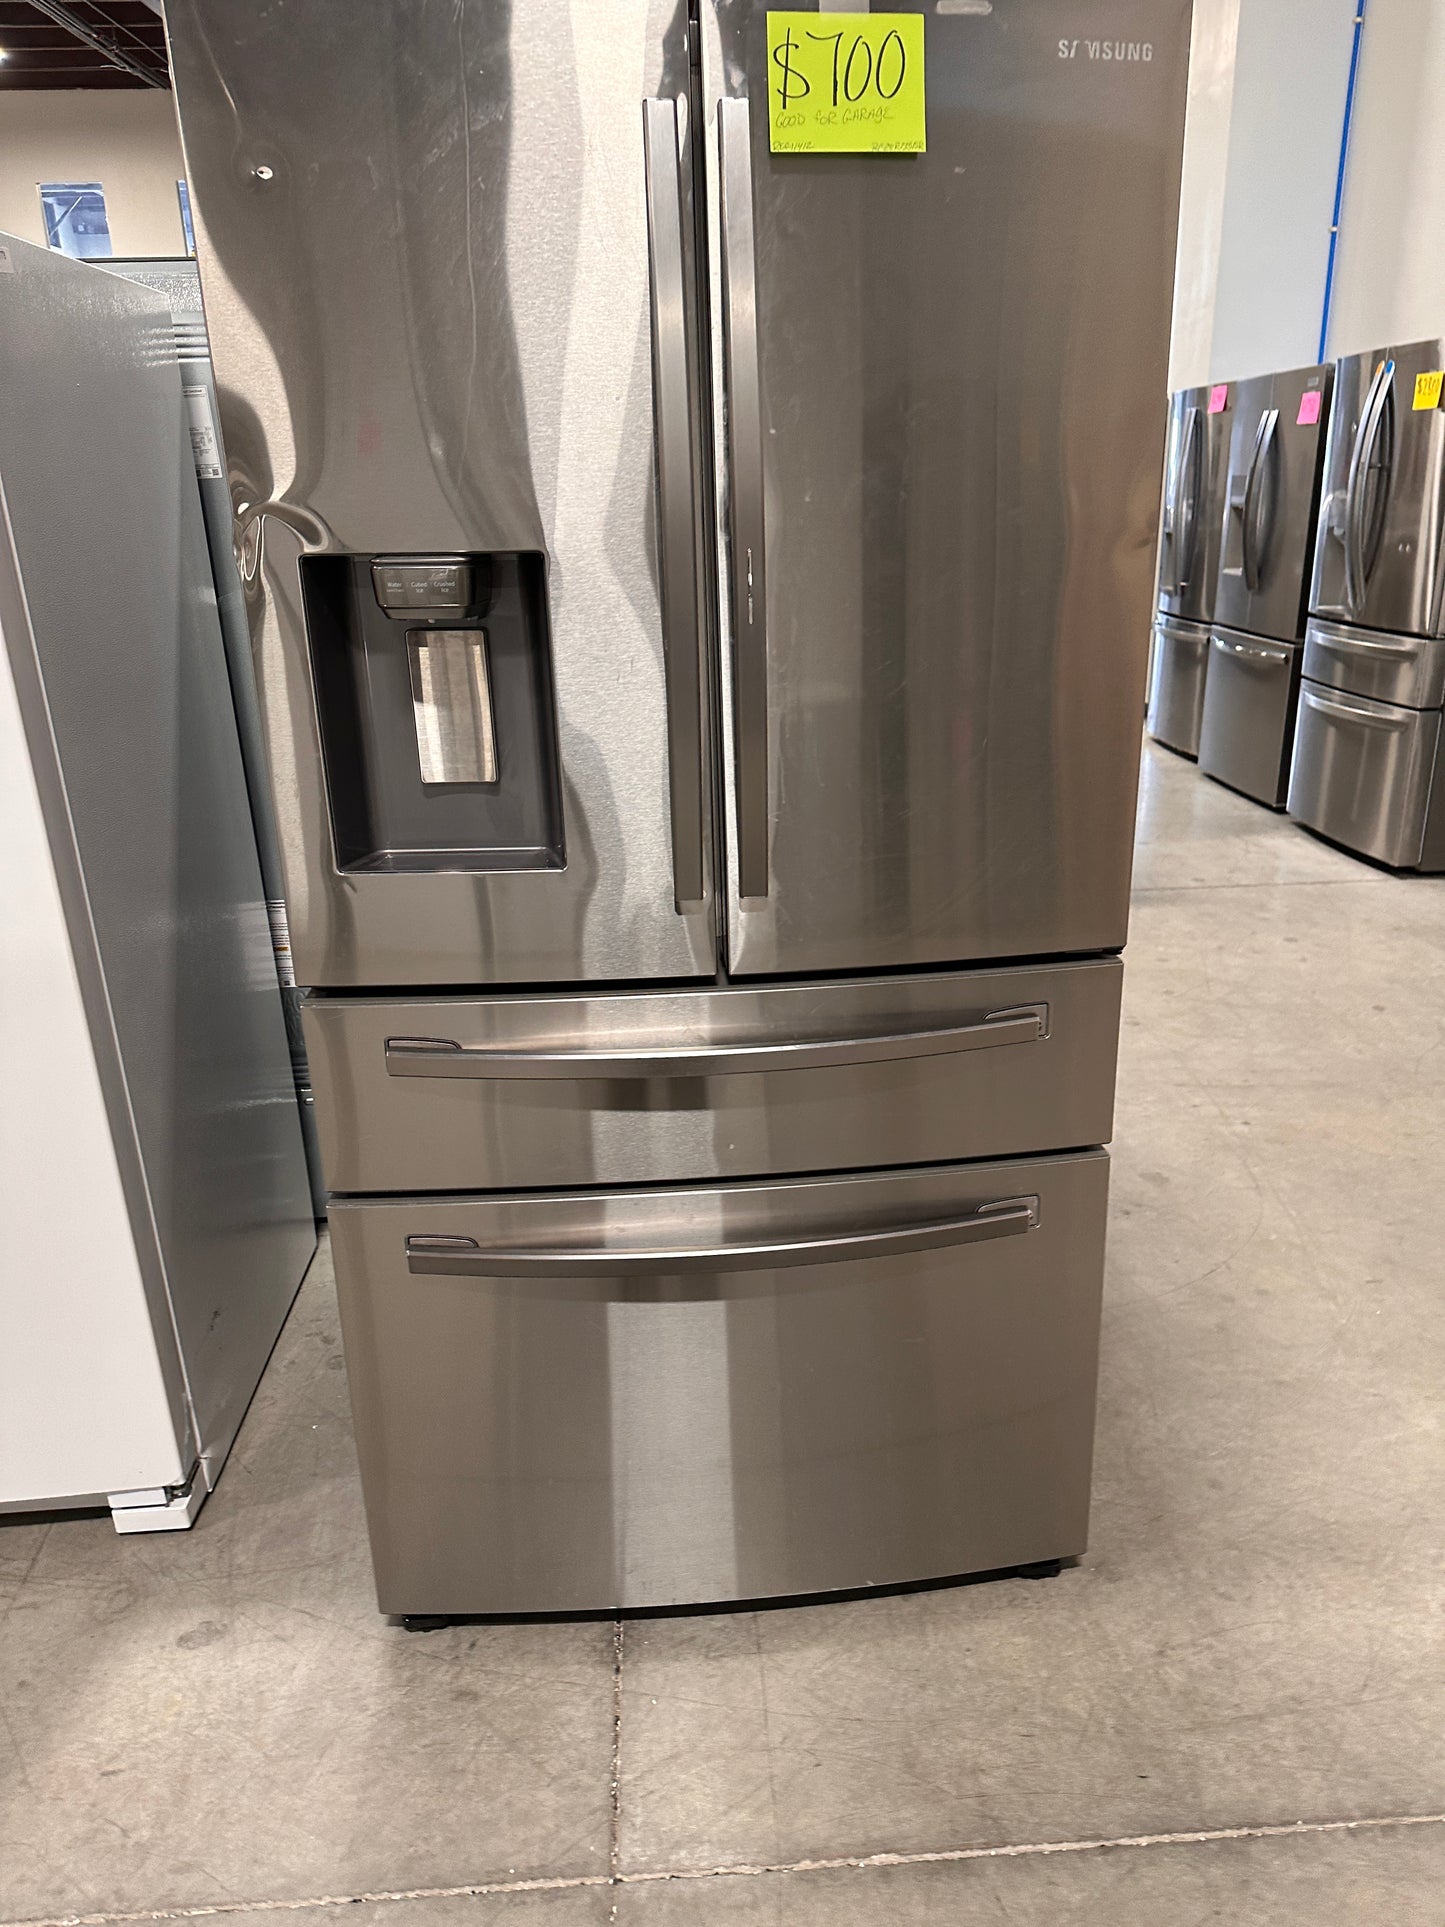 BRAND NEW FRENCH DOOR REFRIGERATOR - CLEARANCE PRICE!  REF11412 - RF28R7351